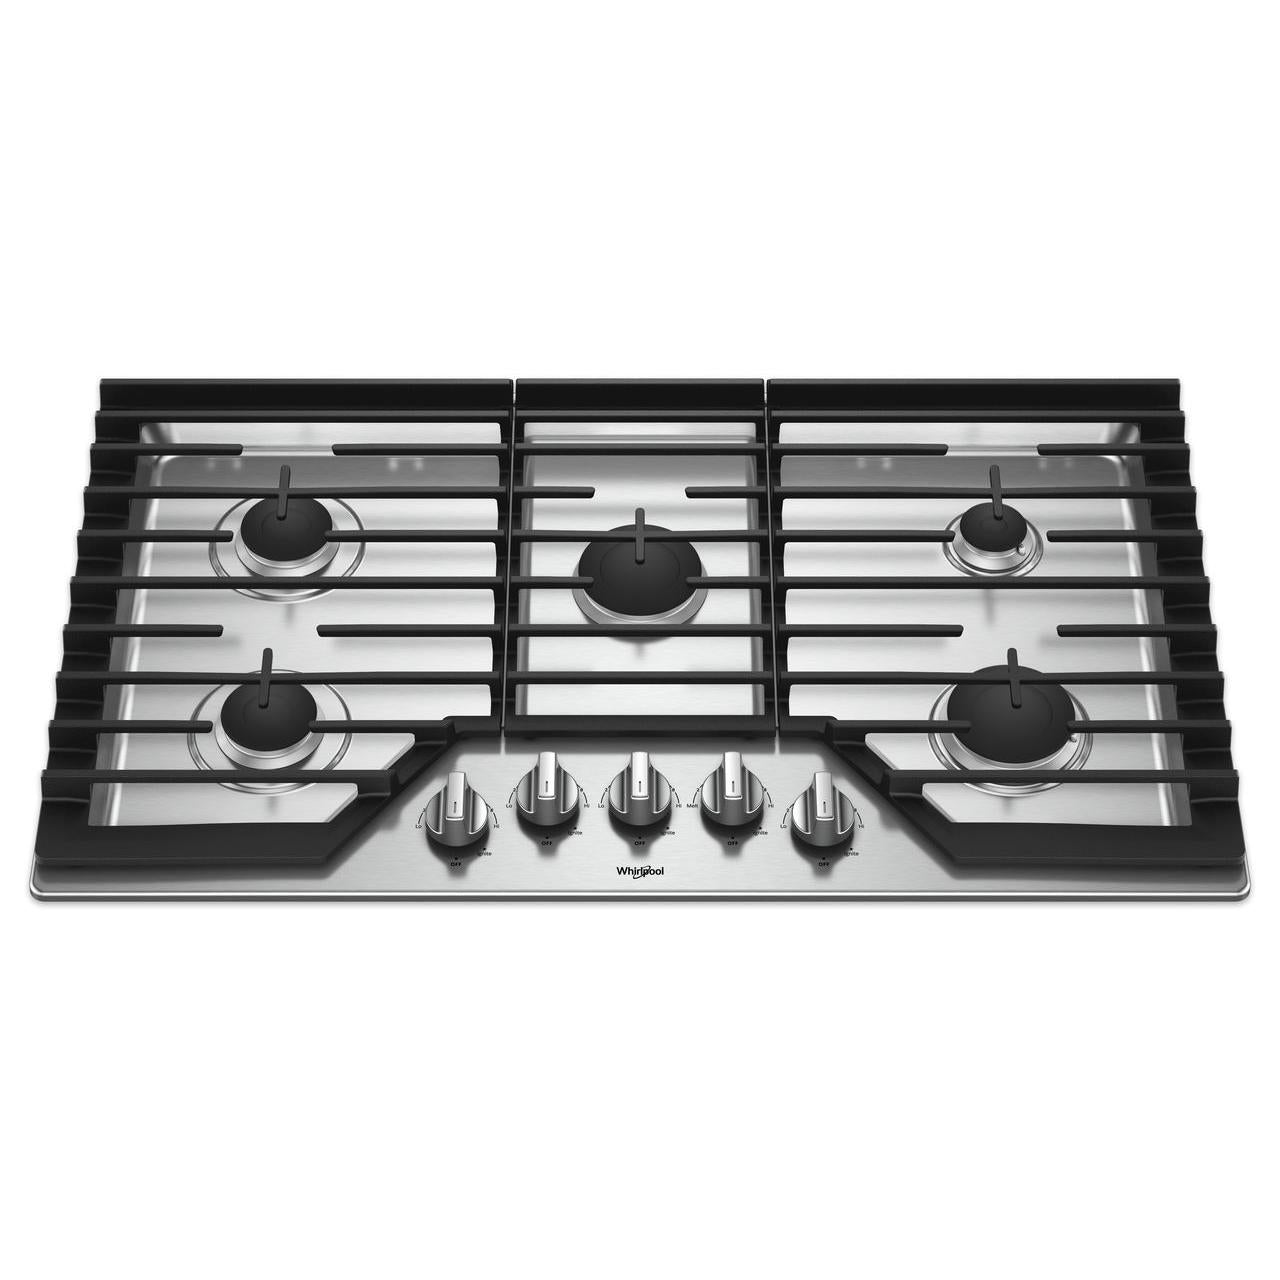 36-inch, Built-in, Gas Cooktop with EZ-2-Lift™ WCG55US6HS